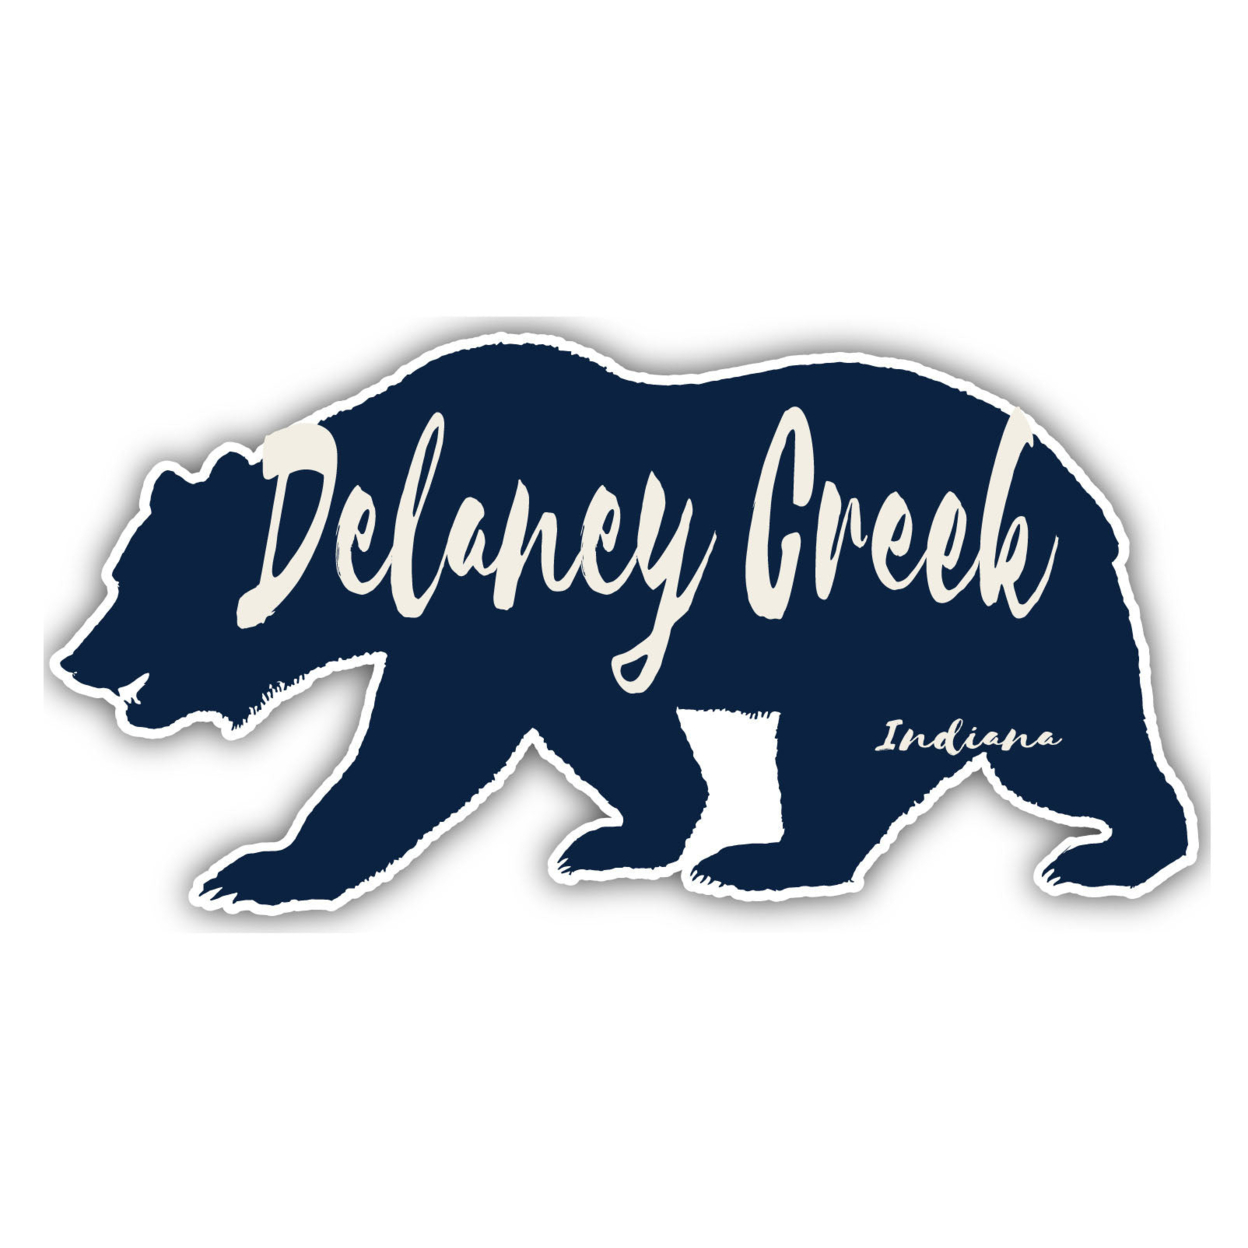 Delaney Creek Indiana Souvenir Decorative Stickers (Choose Theme And Size) - 4-Pack, 6-Inch, Bear